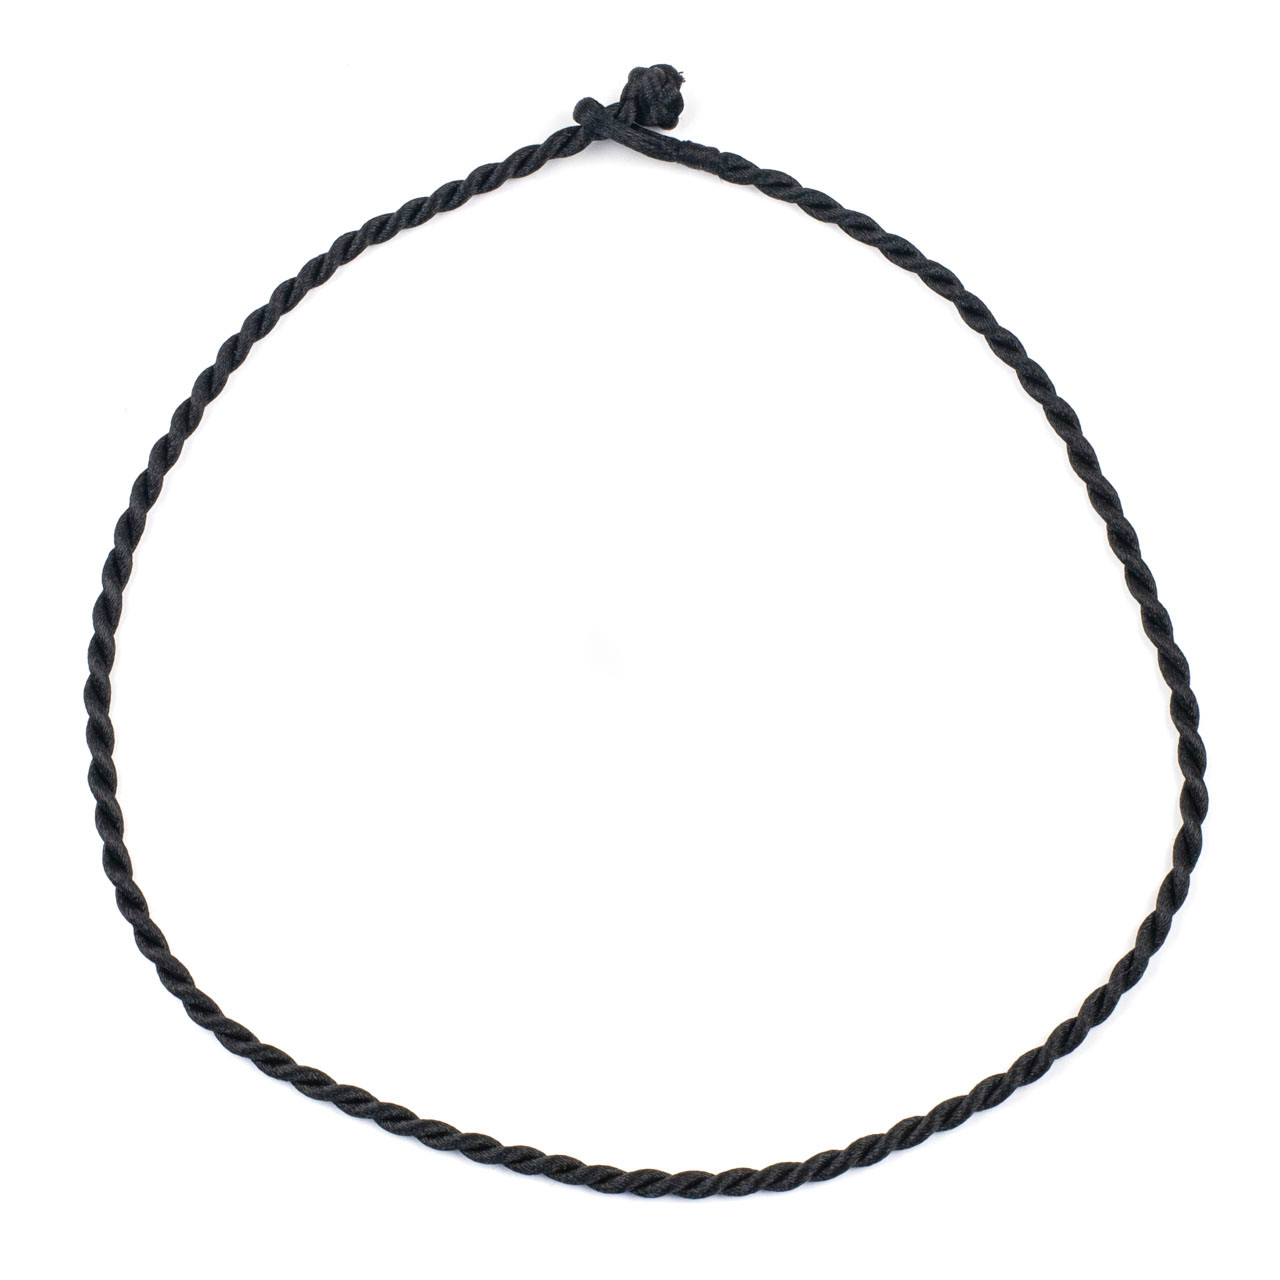 POTESSA Black Leather Cord Choker Necklace Double Knotted Adjustable  Necklace Minimalist Jewelry for Women Men Unisex : Amazon.in: Fashion